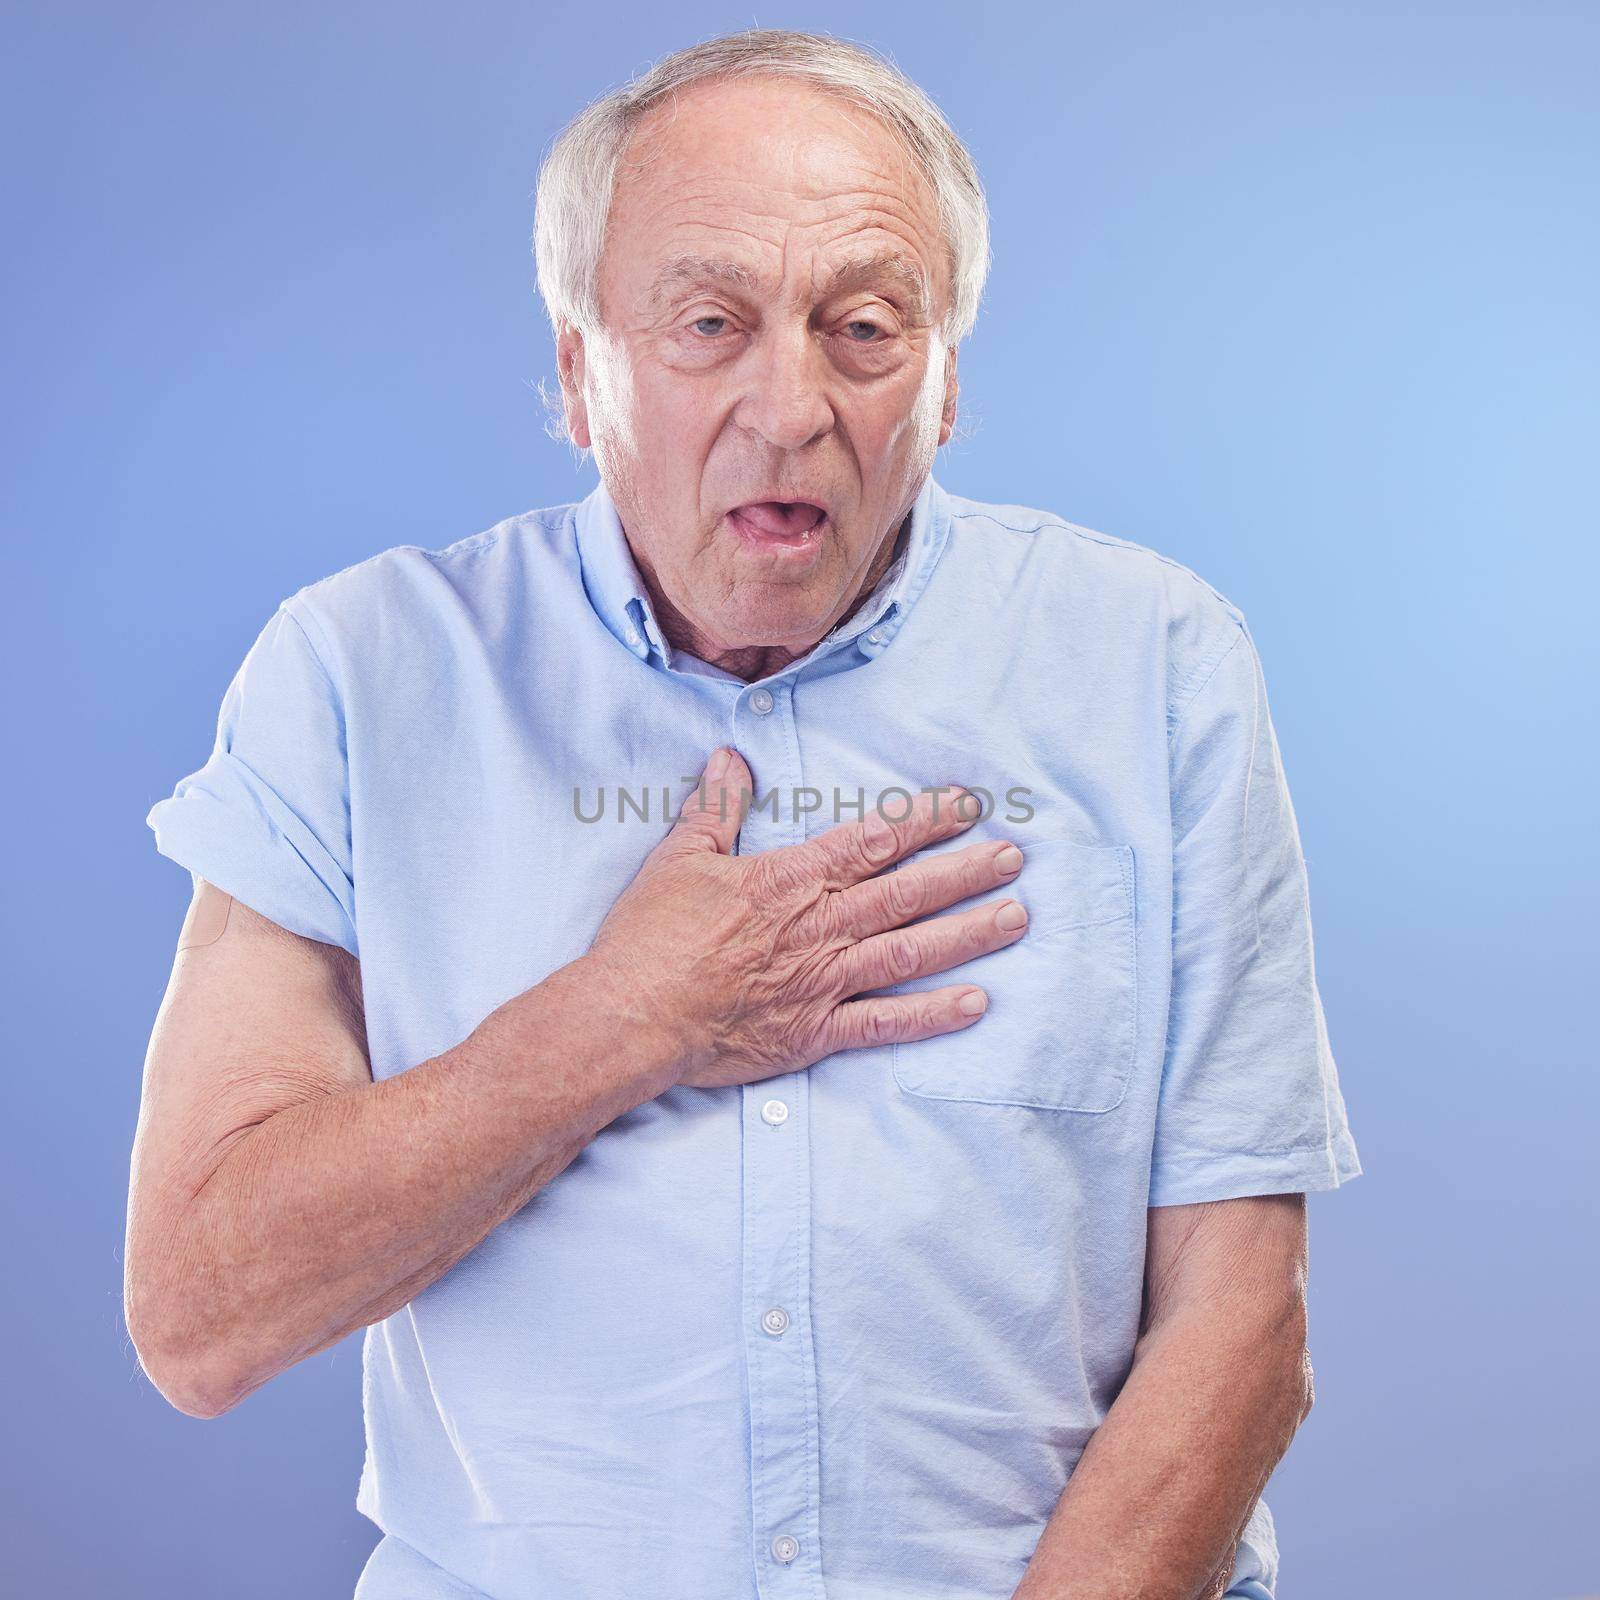 Shortness of breath could shorten your life, get it checked. Studio shot of a senior man experiencing chest discomfort against a blue background. by YuriArcurs